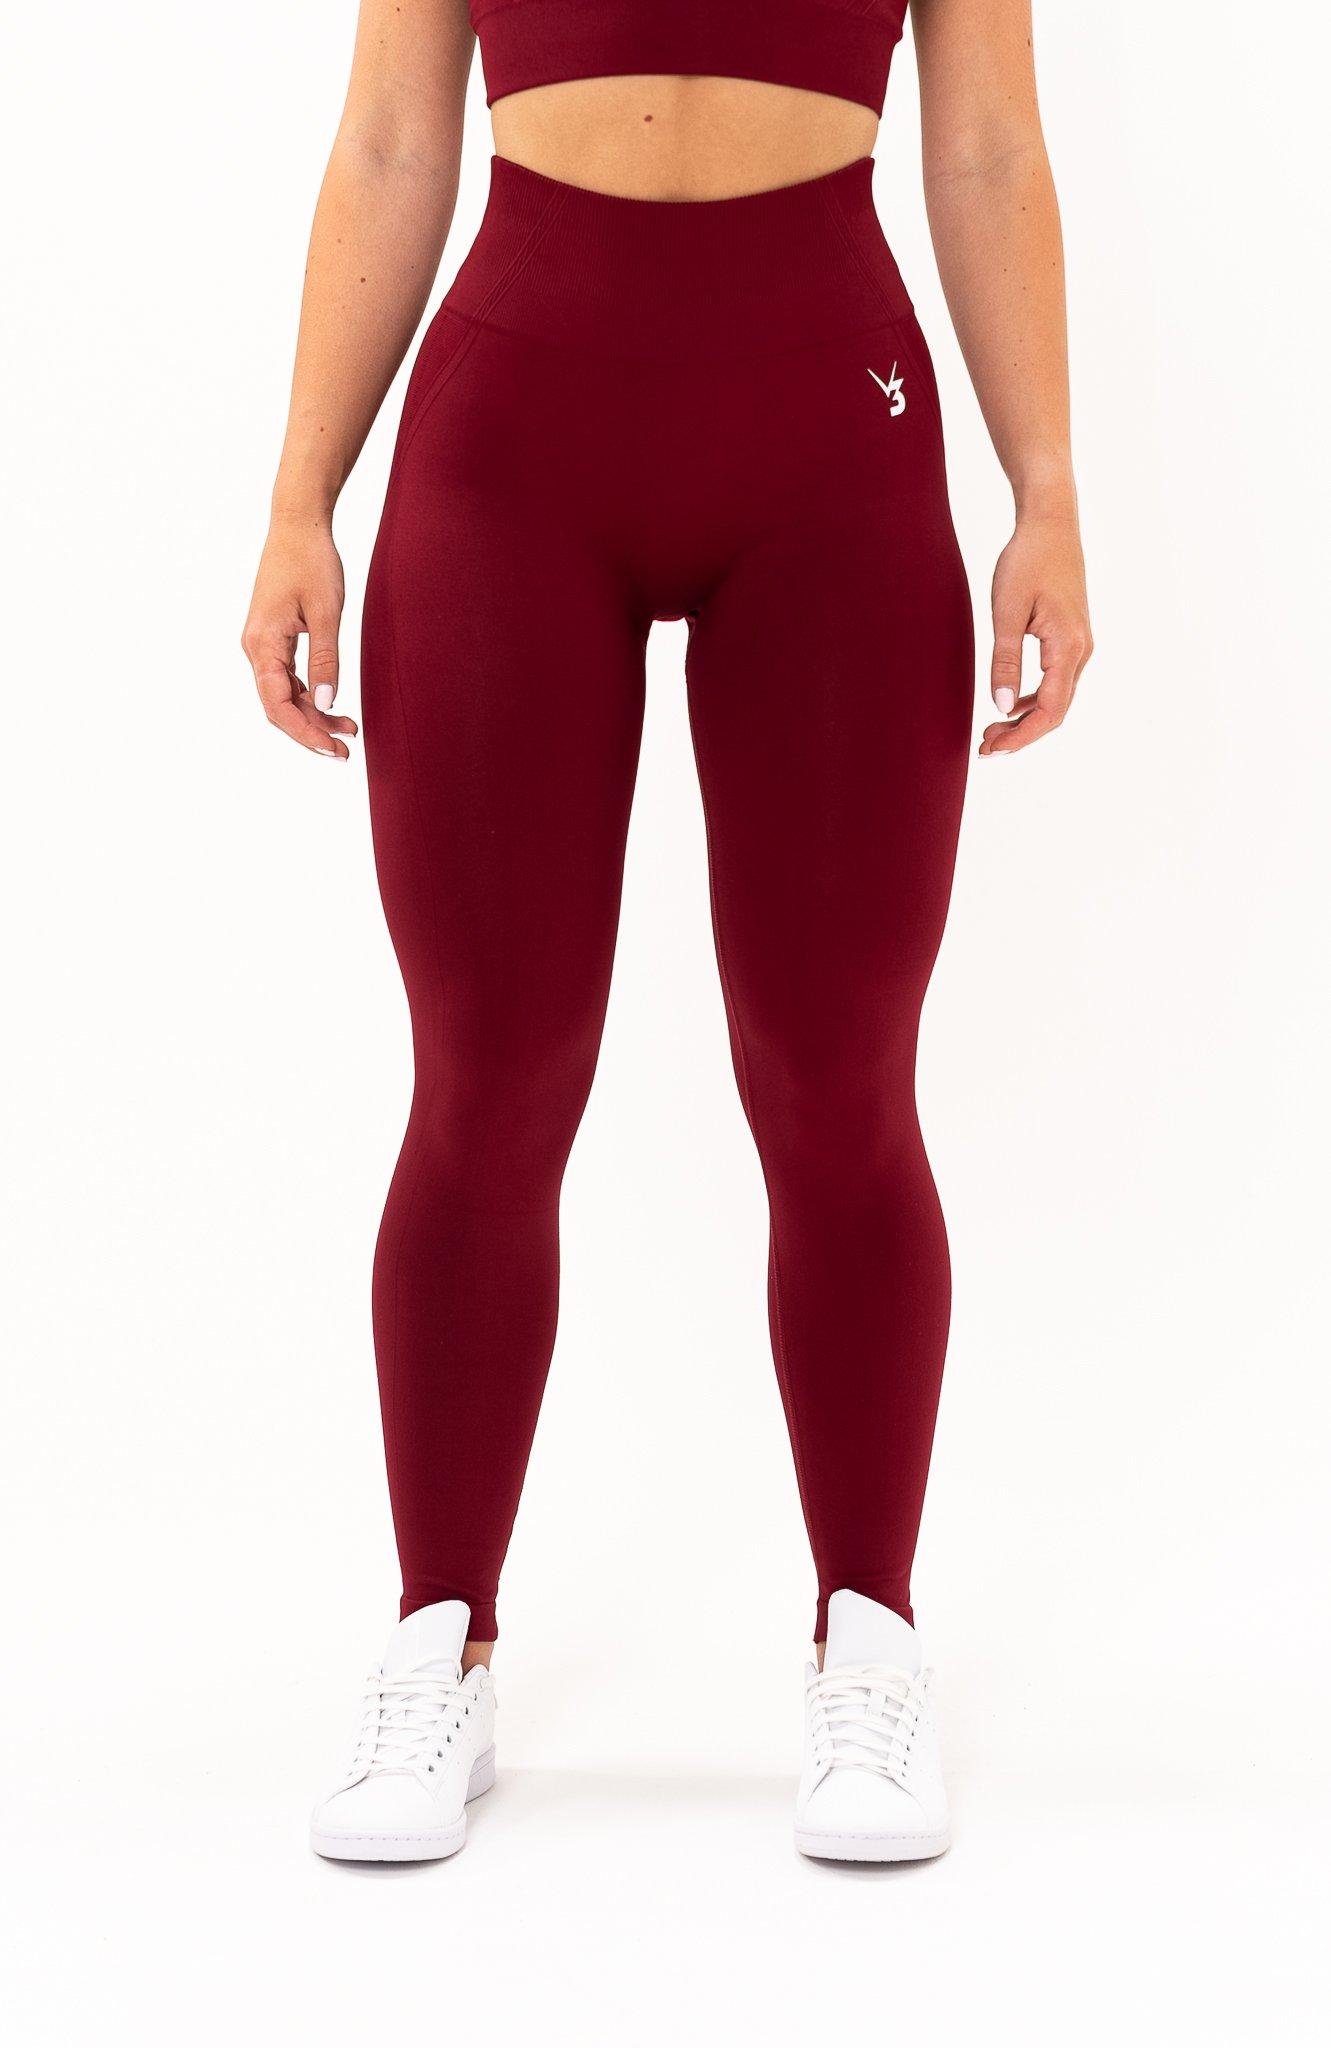 Tempo Seamless Scrunch Shorts - Burgundy Red XS